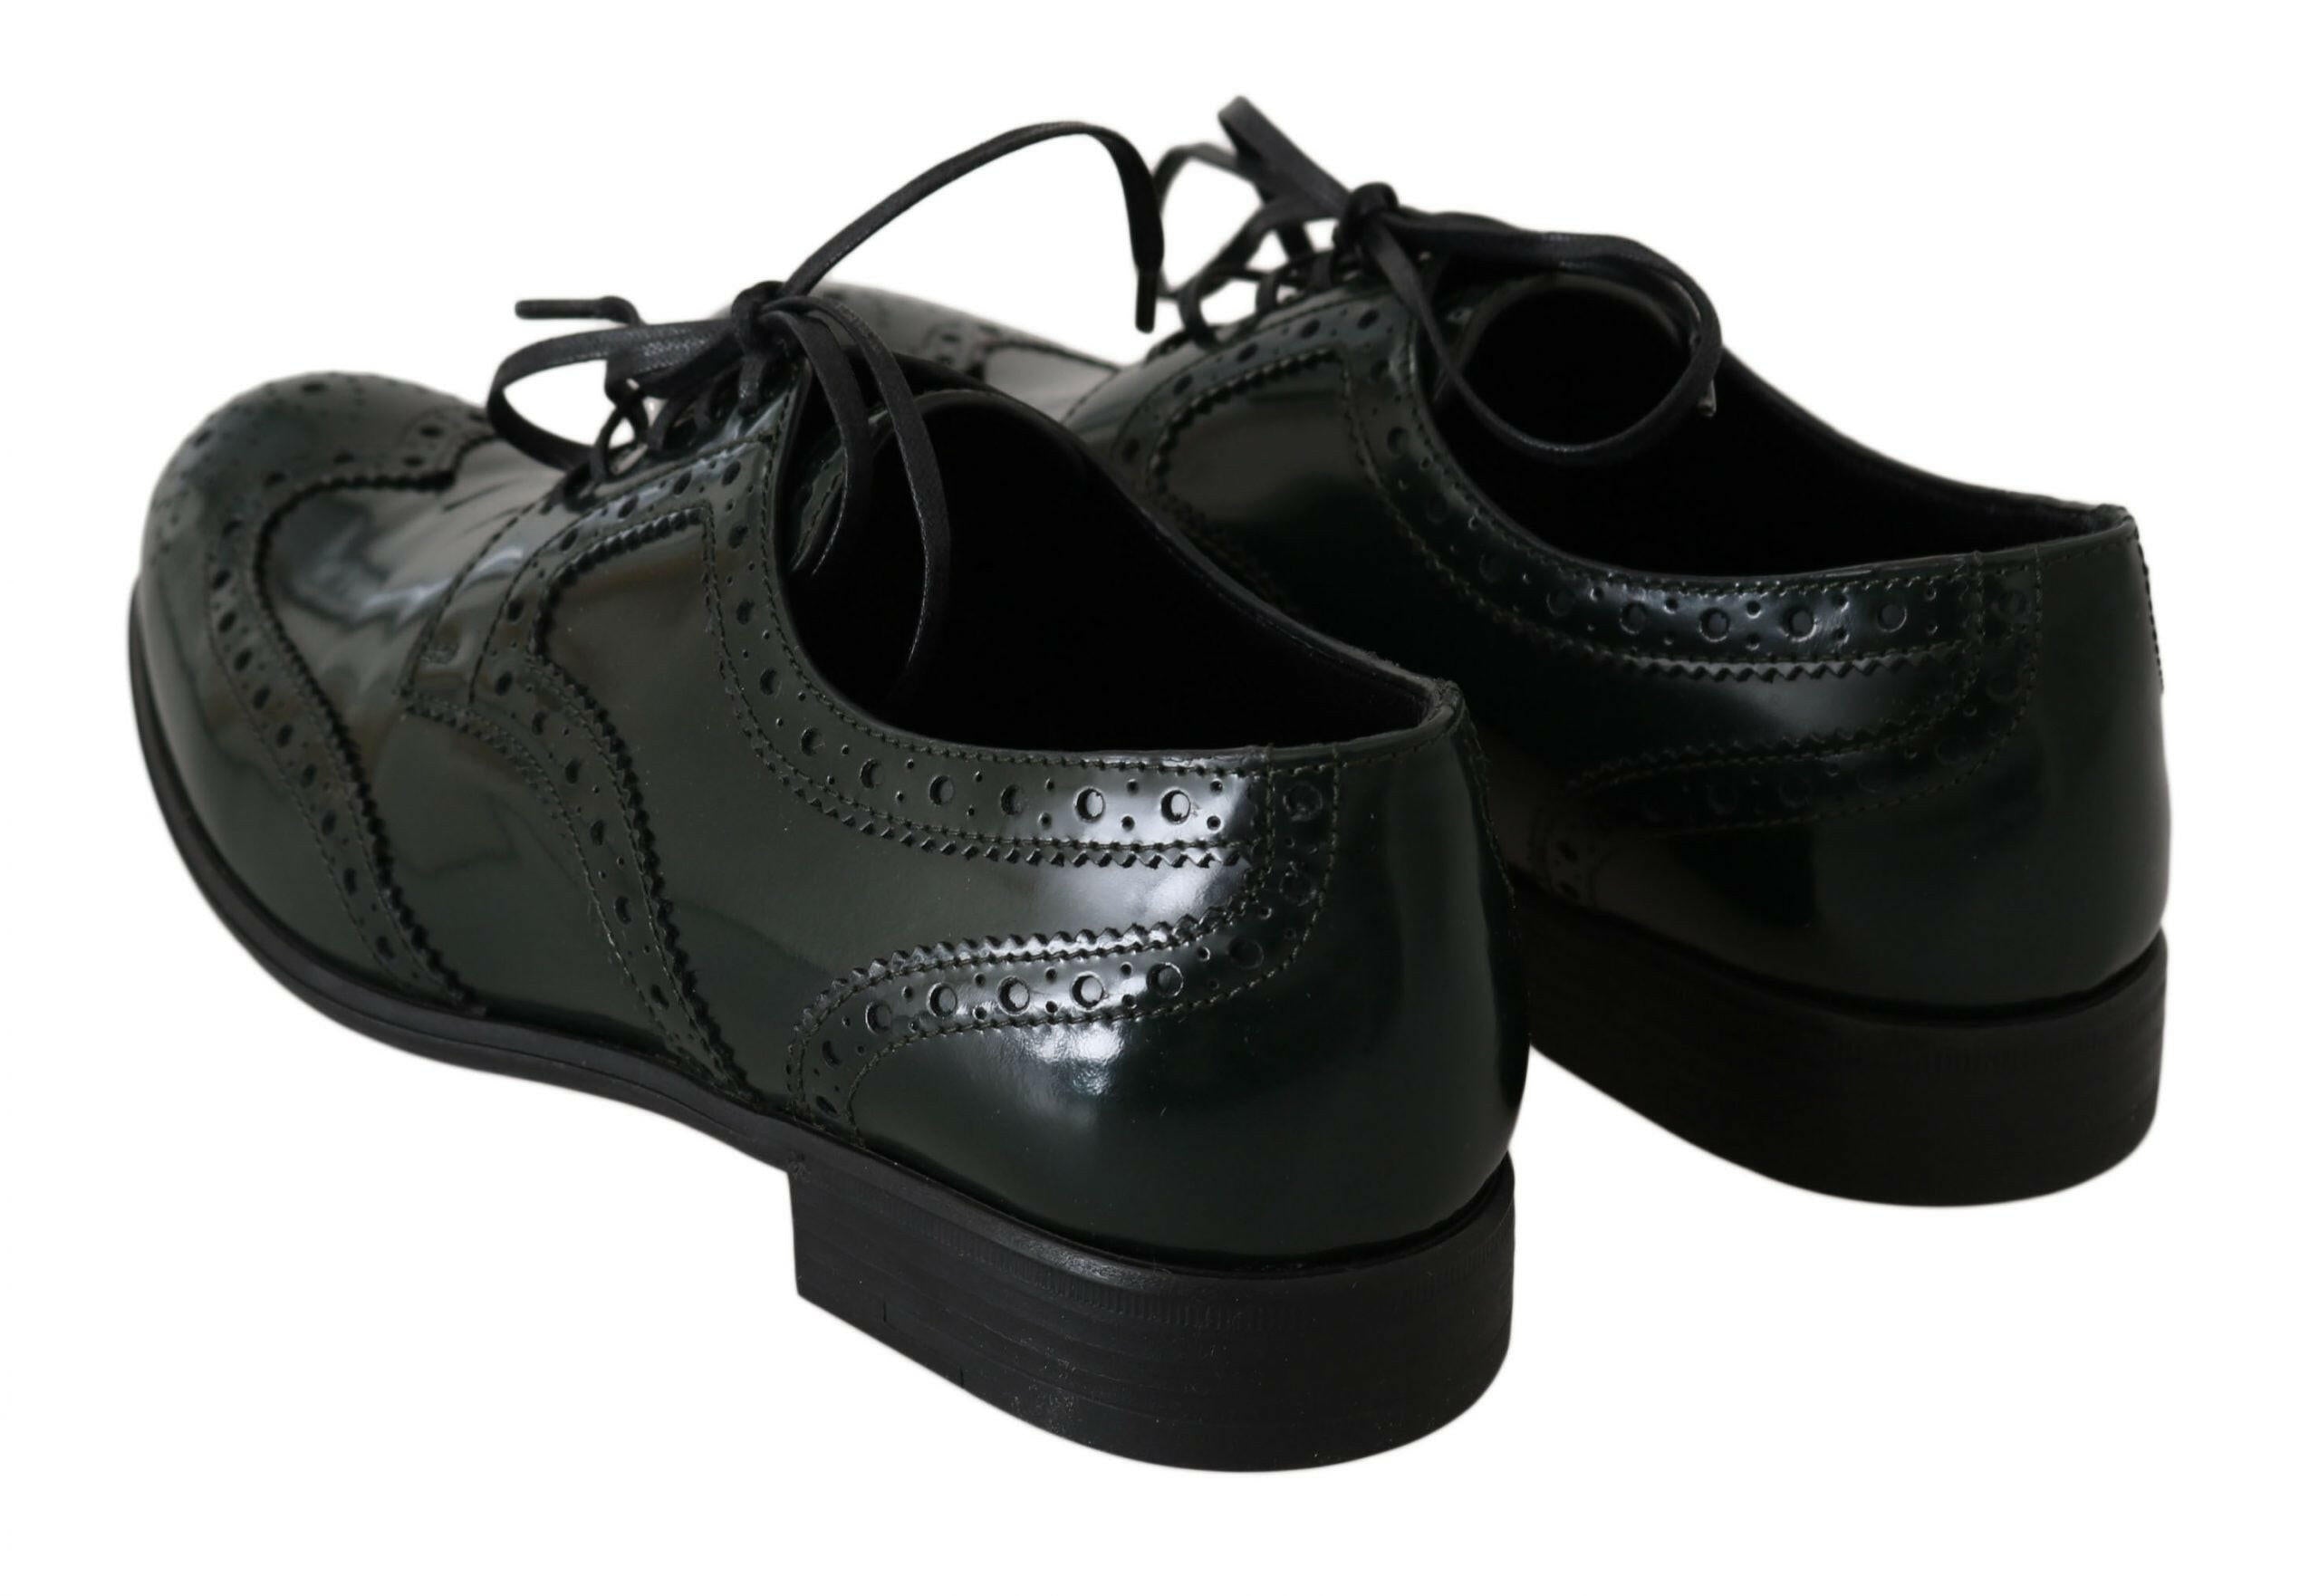 Dolce & Gabbana Green Leather Broque Oxford Wingtip Shoes - GENUINE AUTHENTIC BRAND LLC  